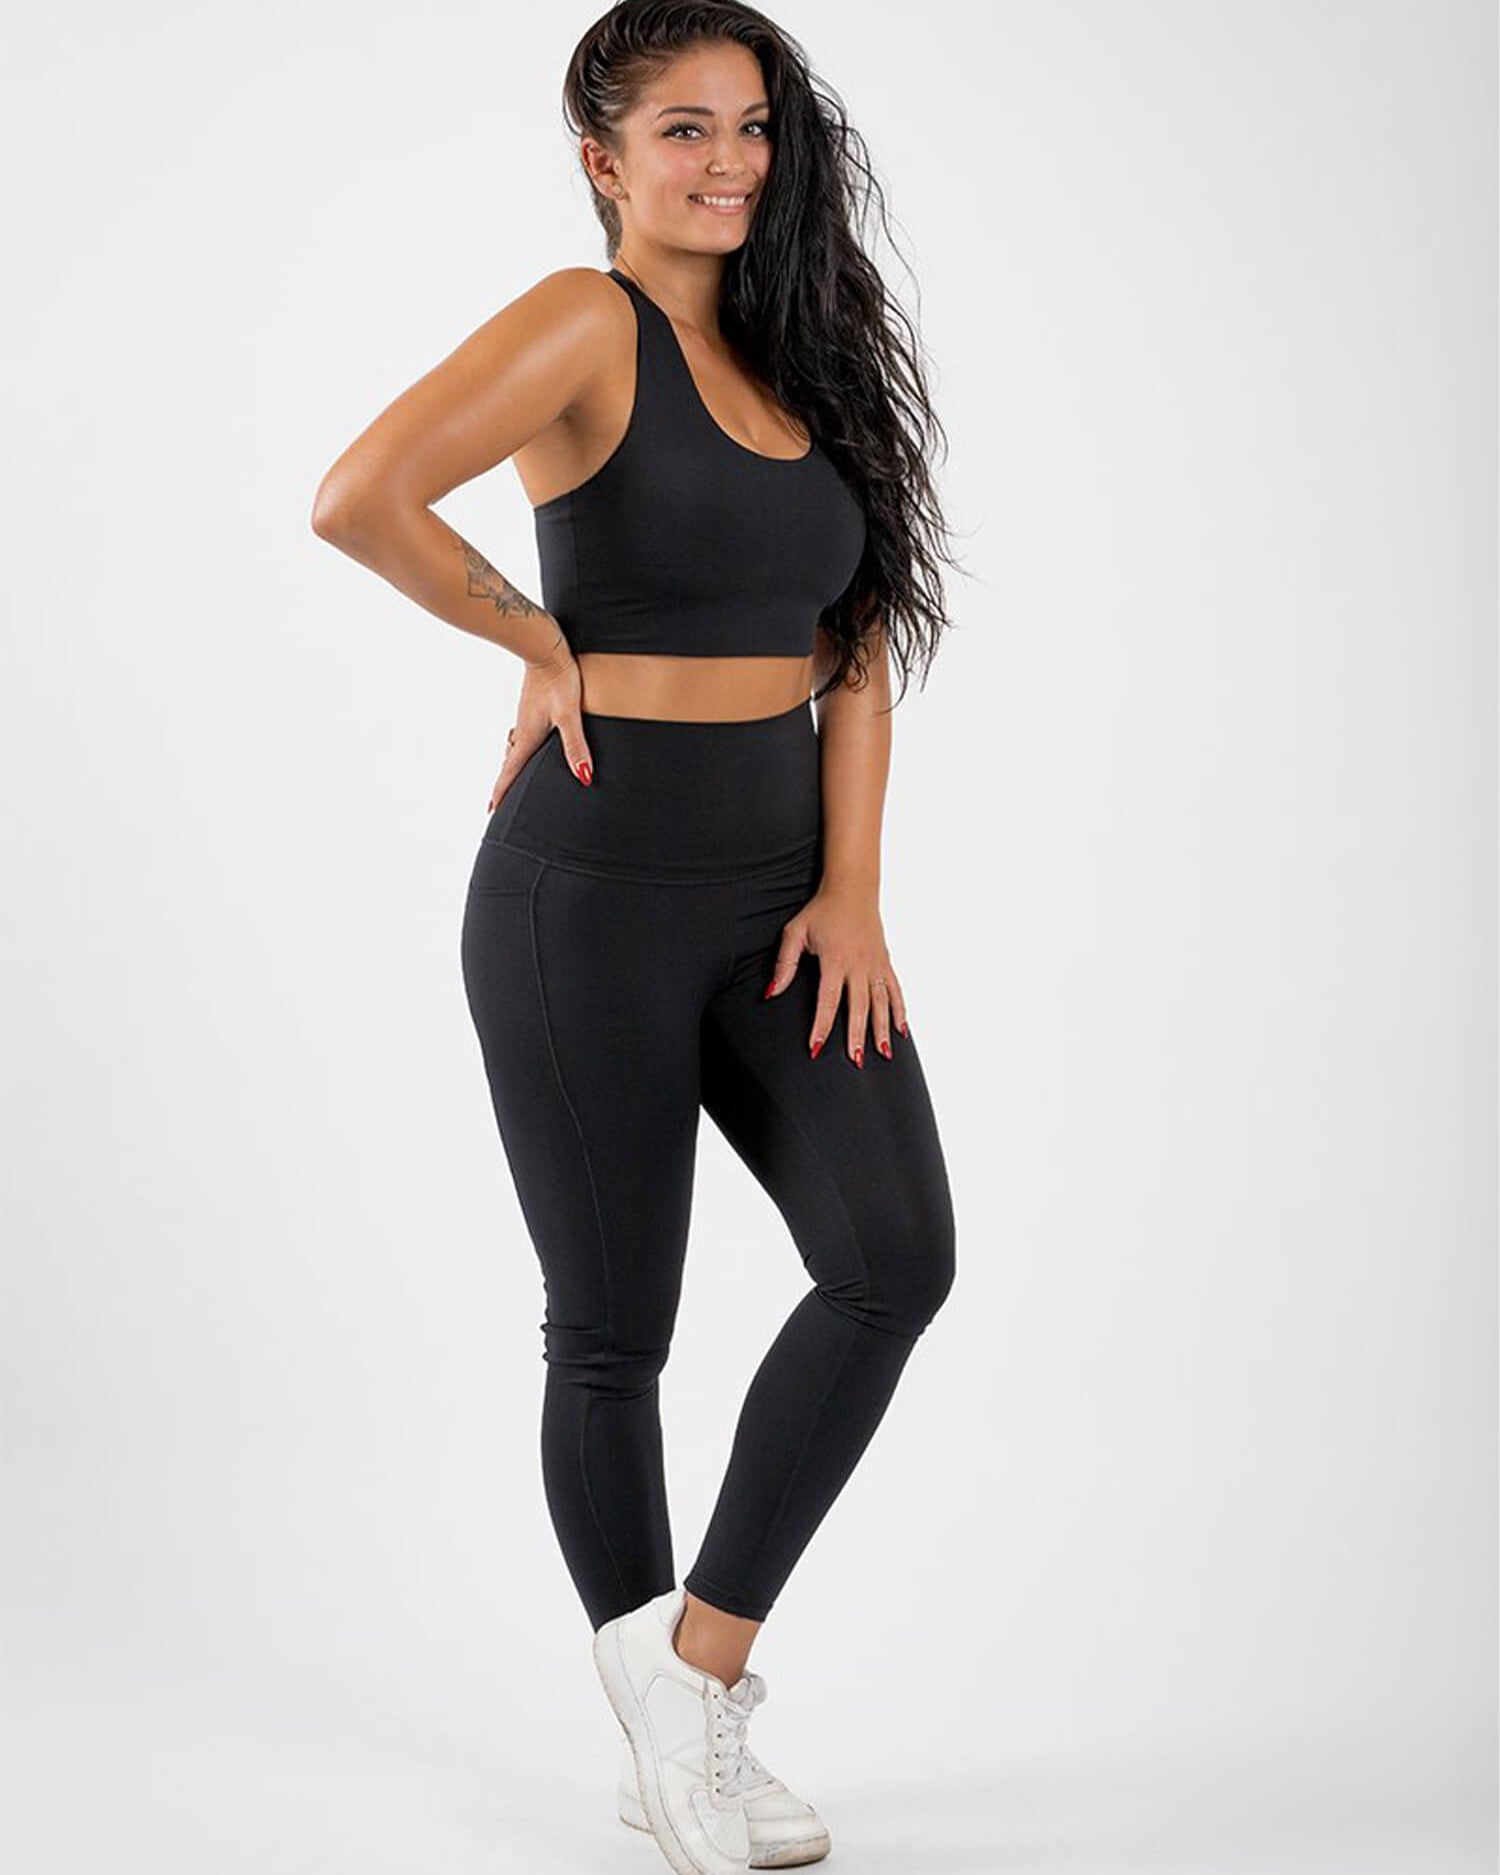 NUX One by One Leggings - Bubblegum – Forte Fitness Southern Pines